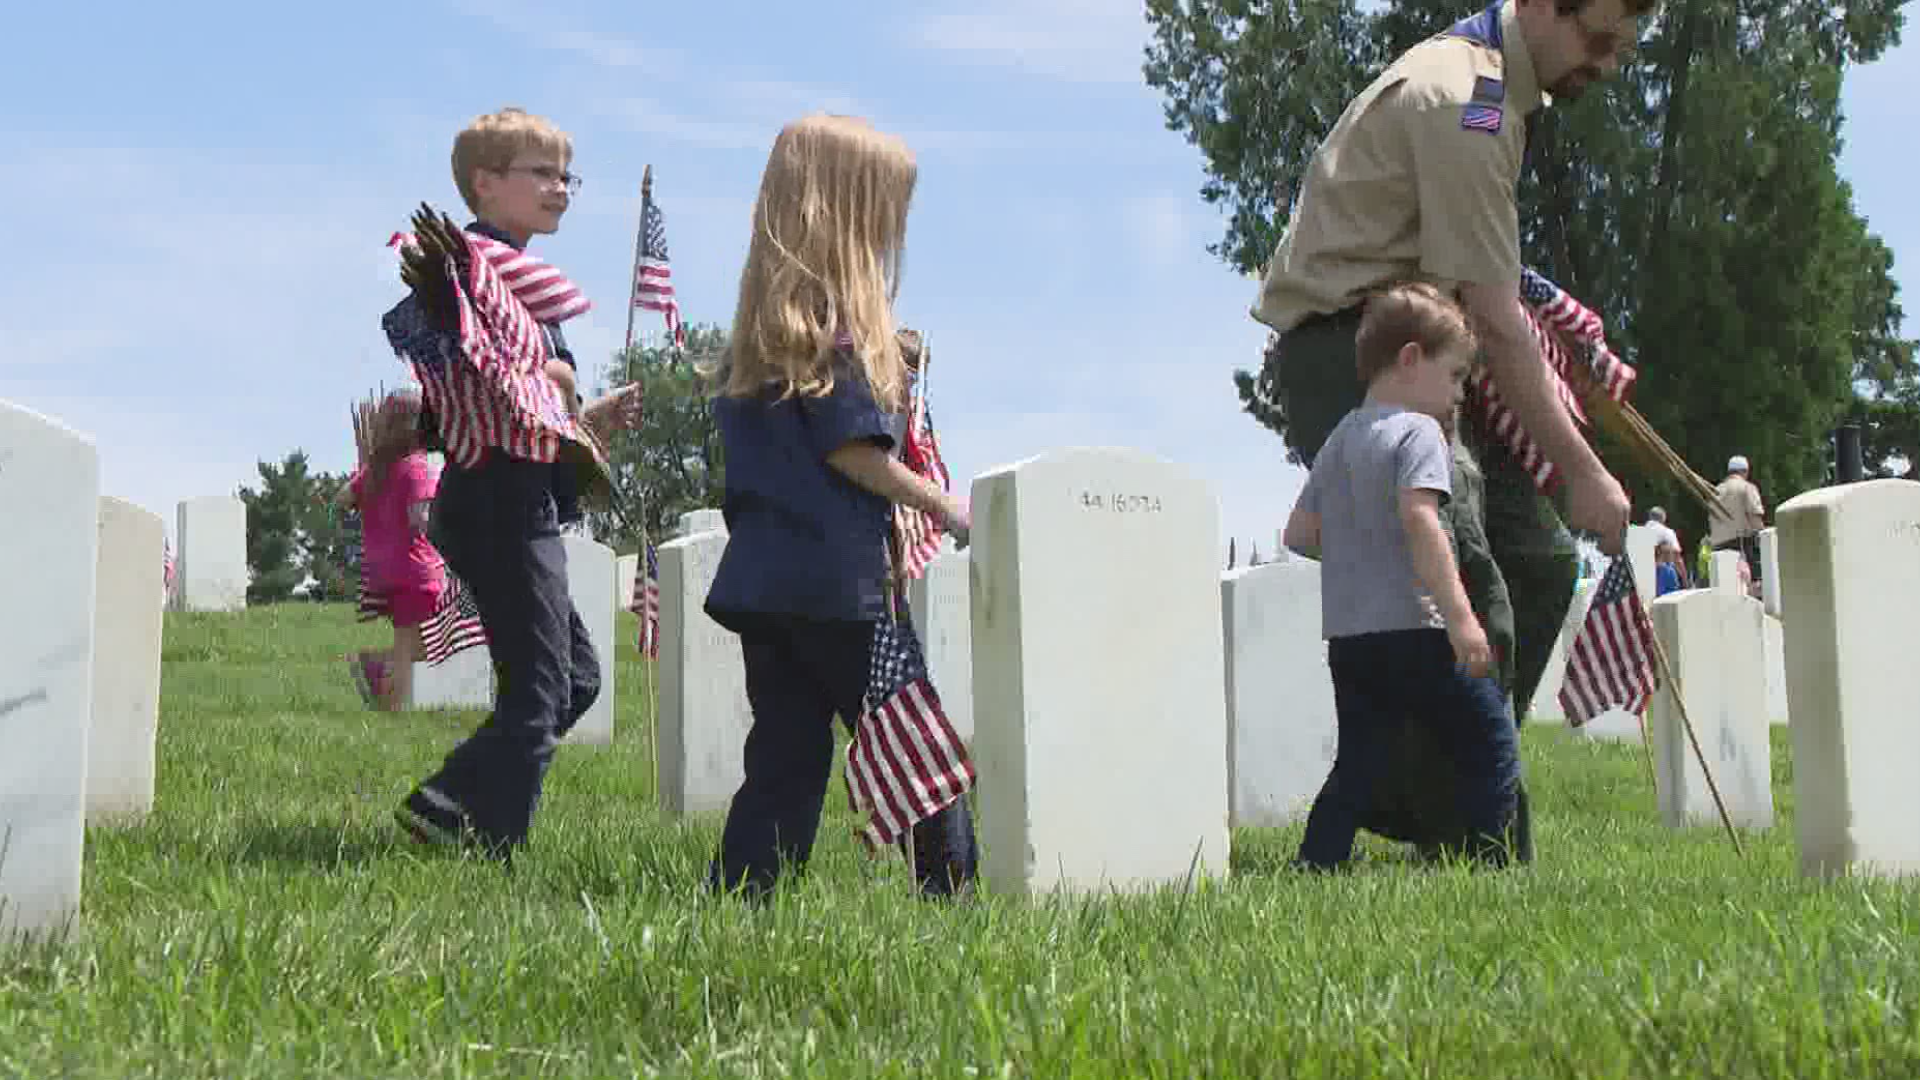 During the annual event, thousands of scouts plant American flags at the gravesites of more than 100,000 veterans